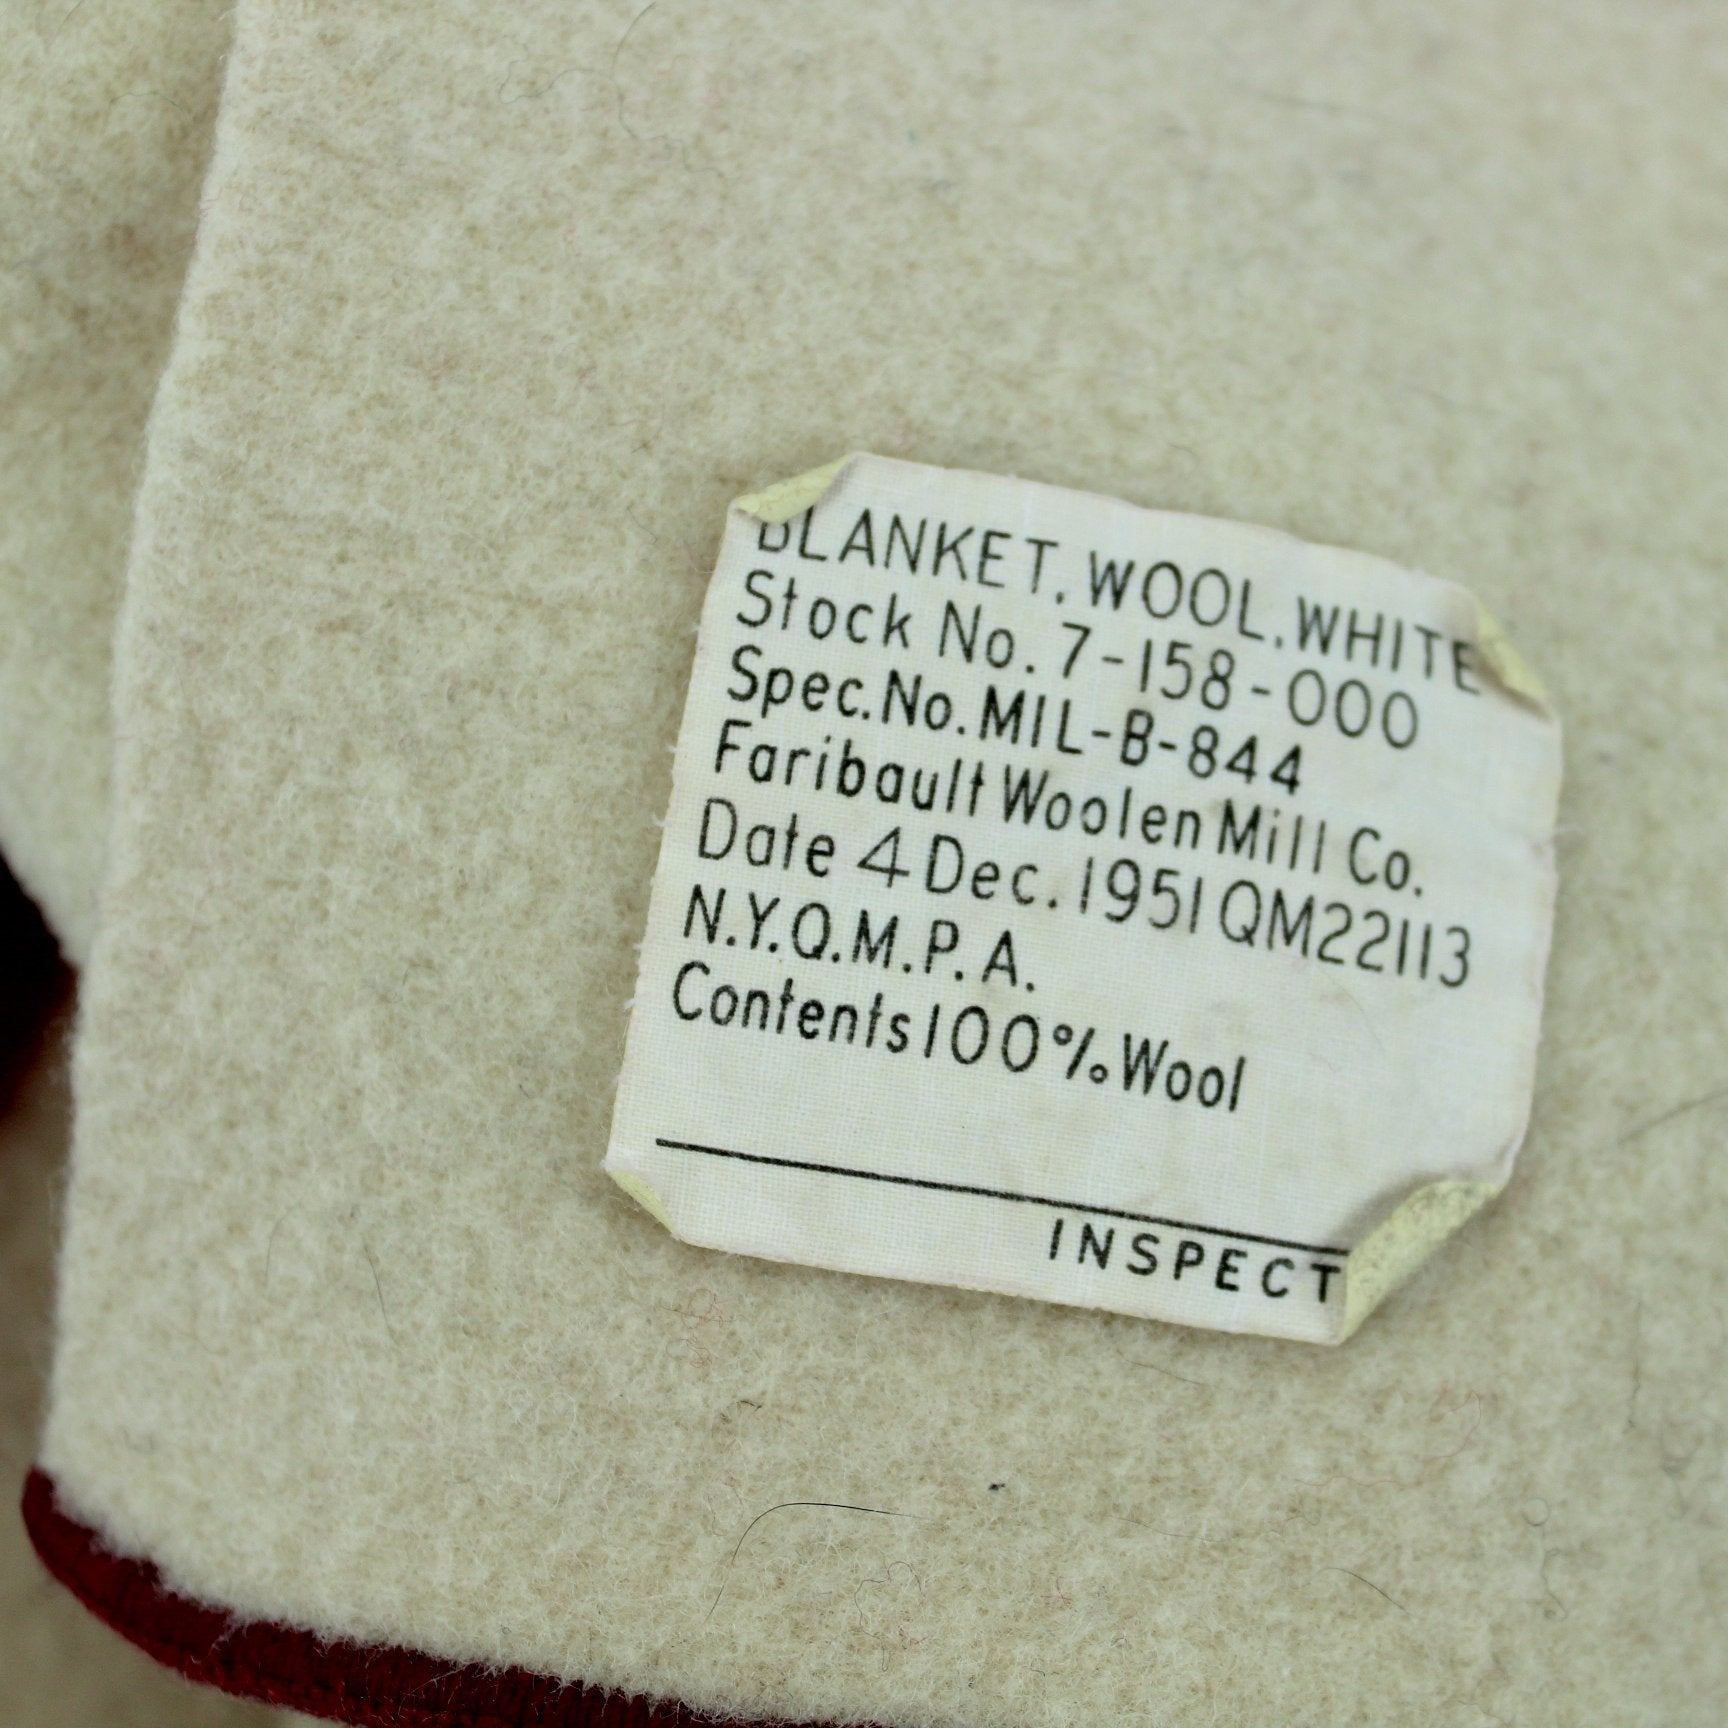 Faribault Faribo 1952 Medical Insignia Military Style Wool Blanket tag applied at woolen mill intact